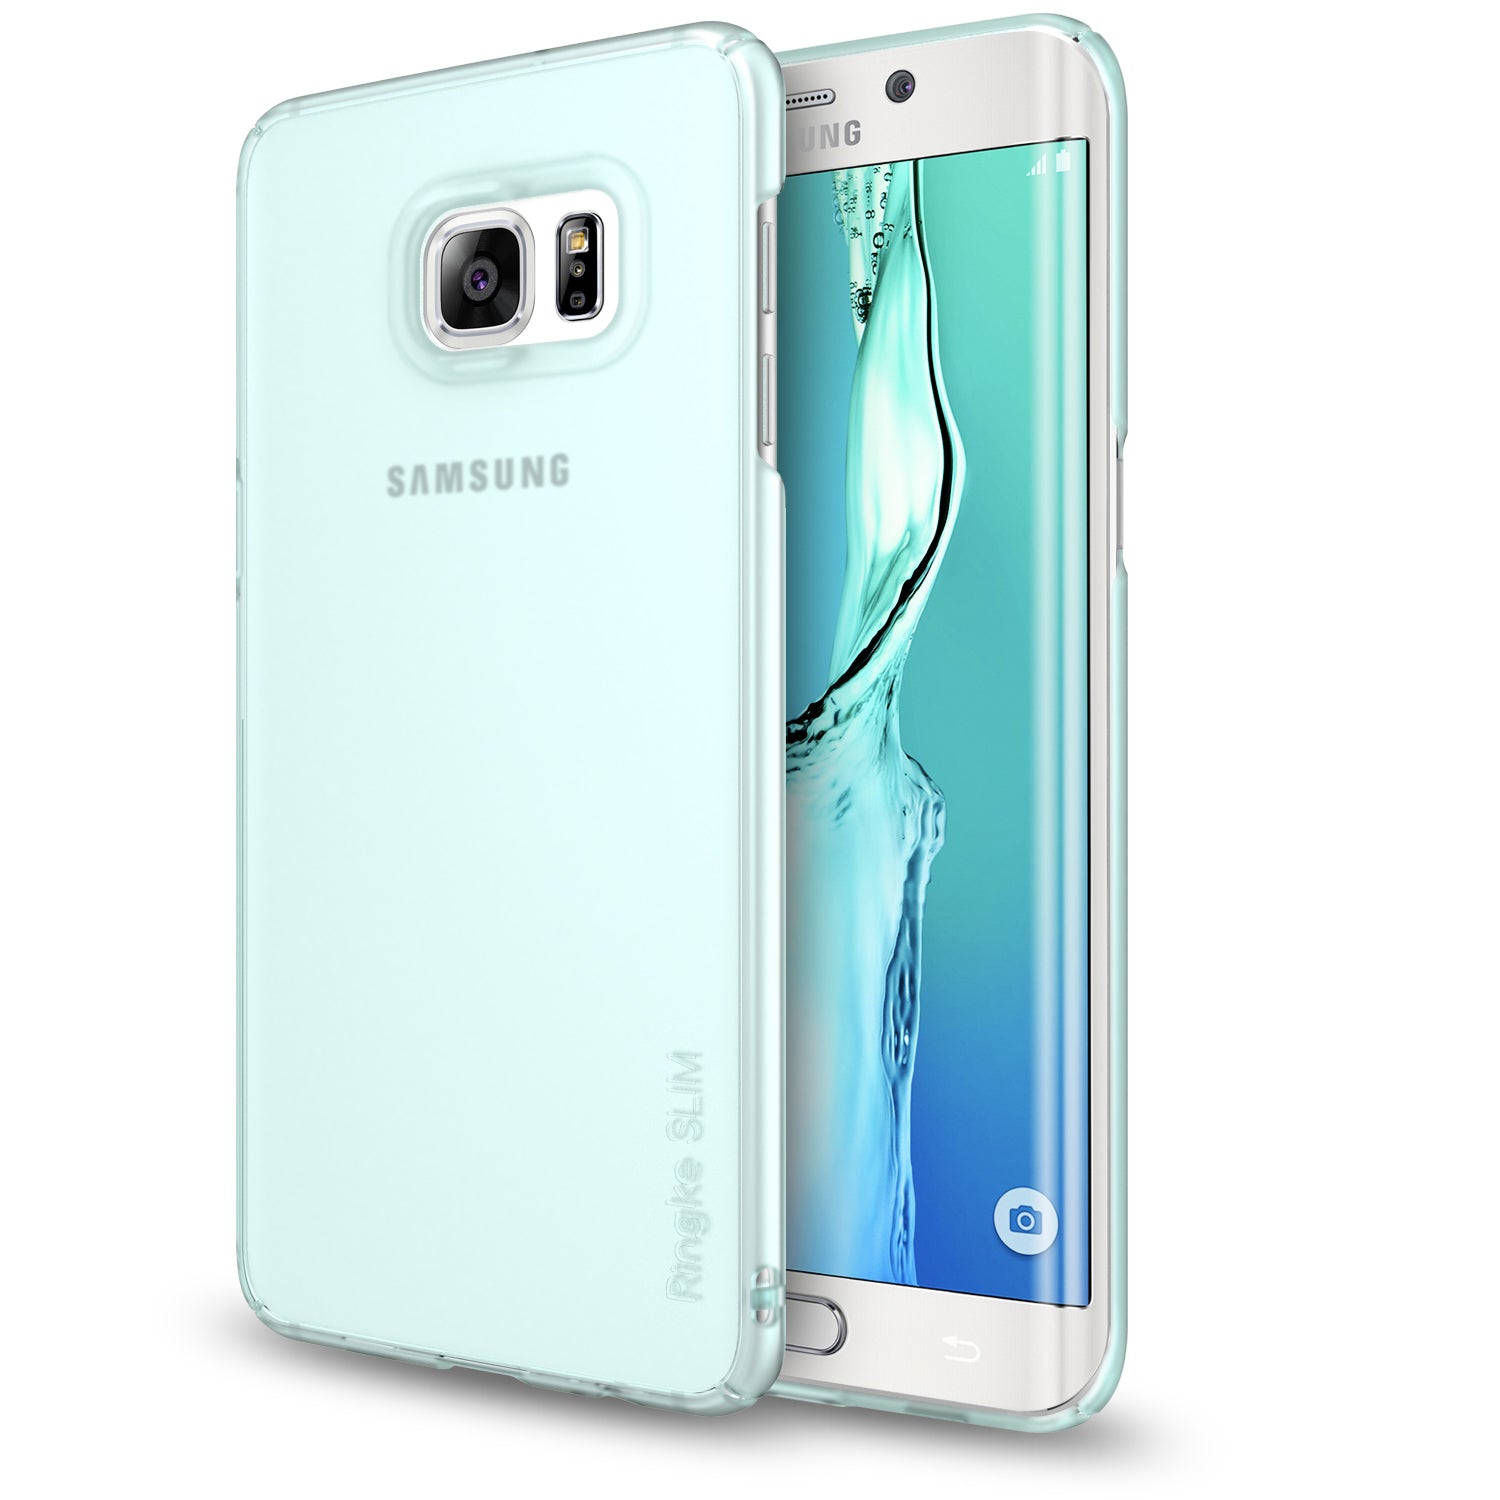 ringke slim premium thin hard pc lightweight cover case for galaxy s6 edge plus frost mint